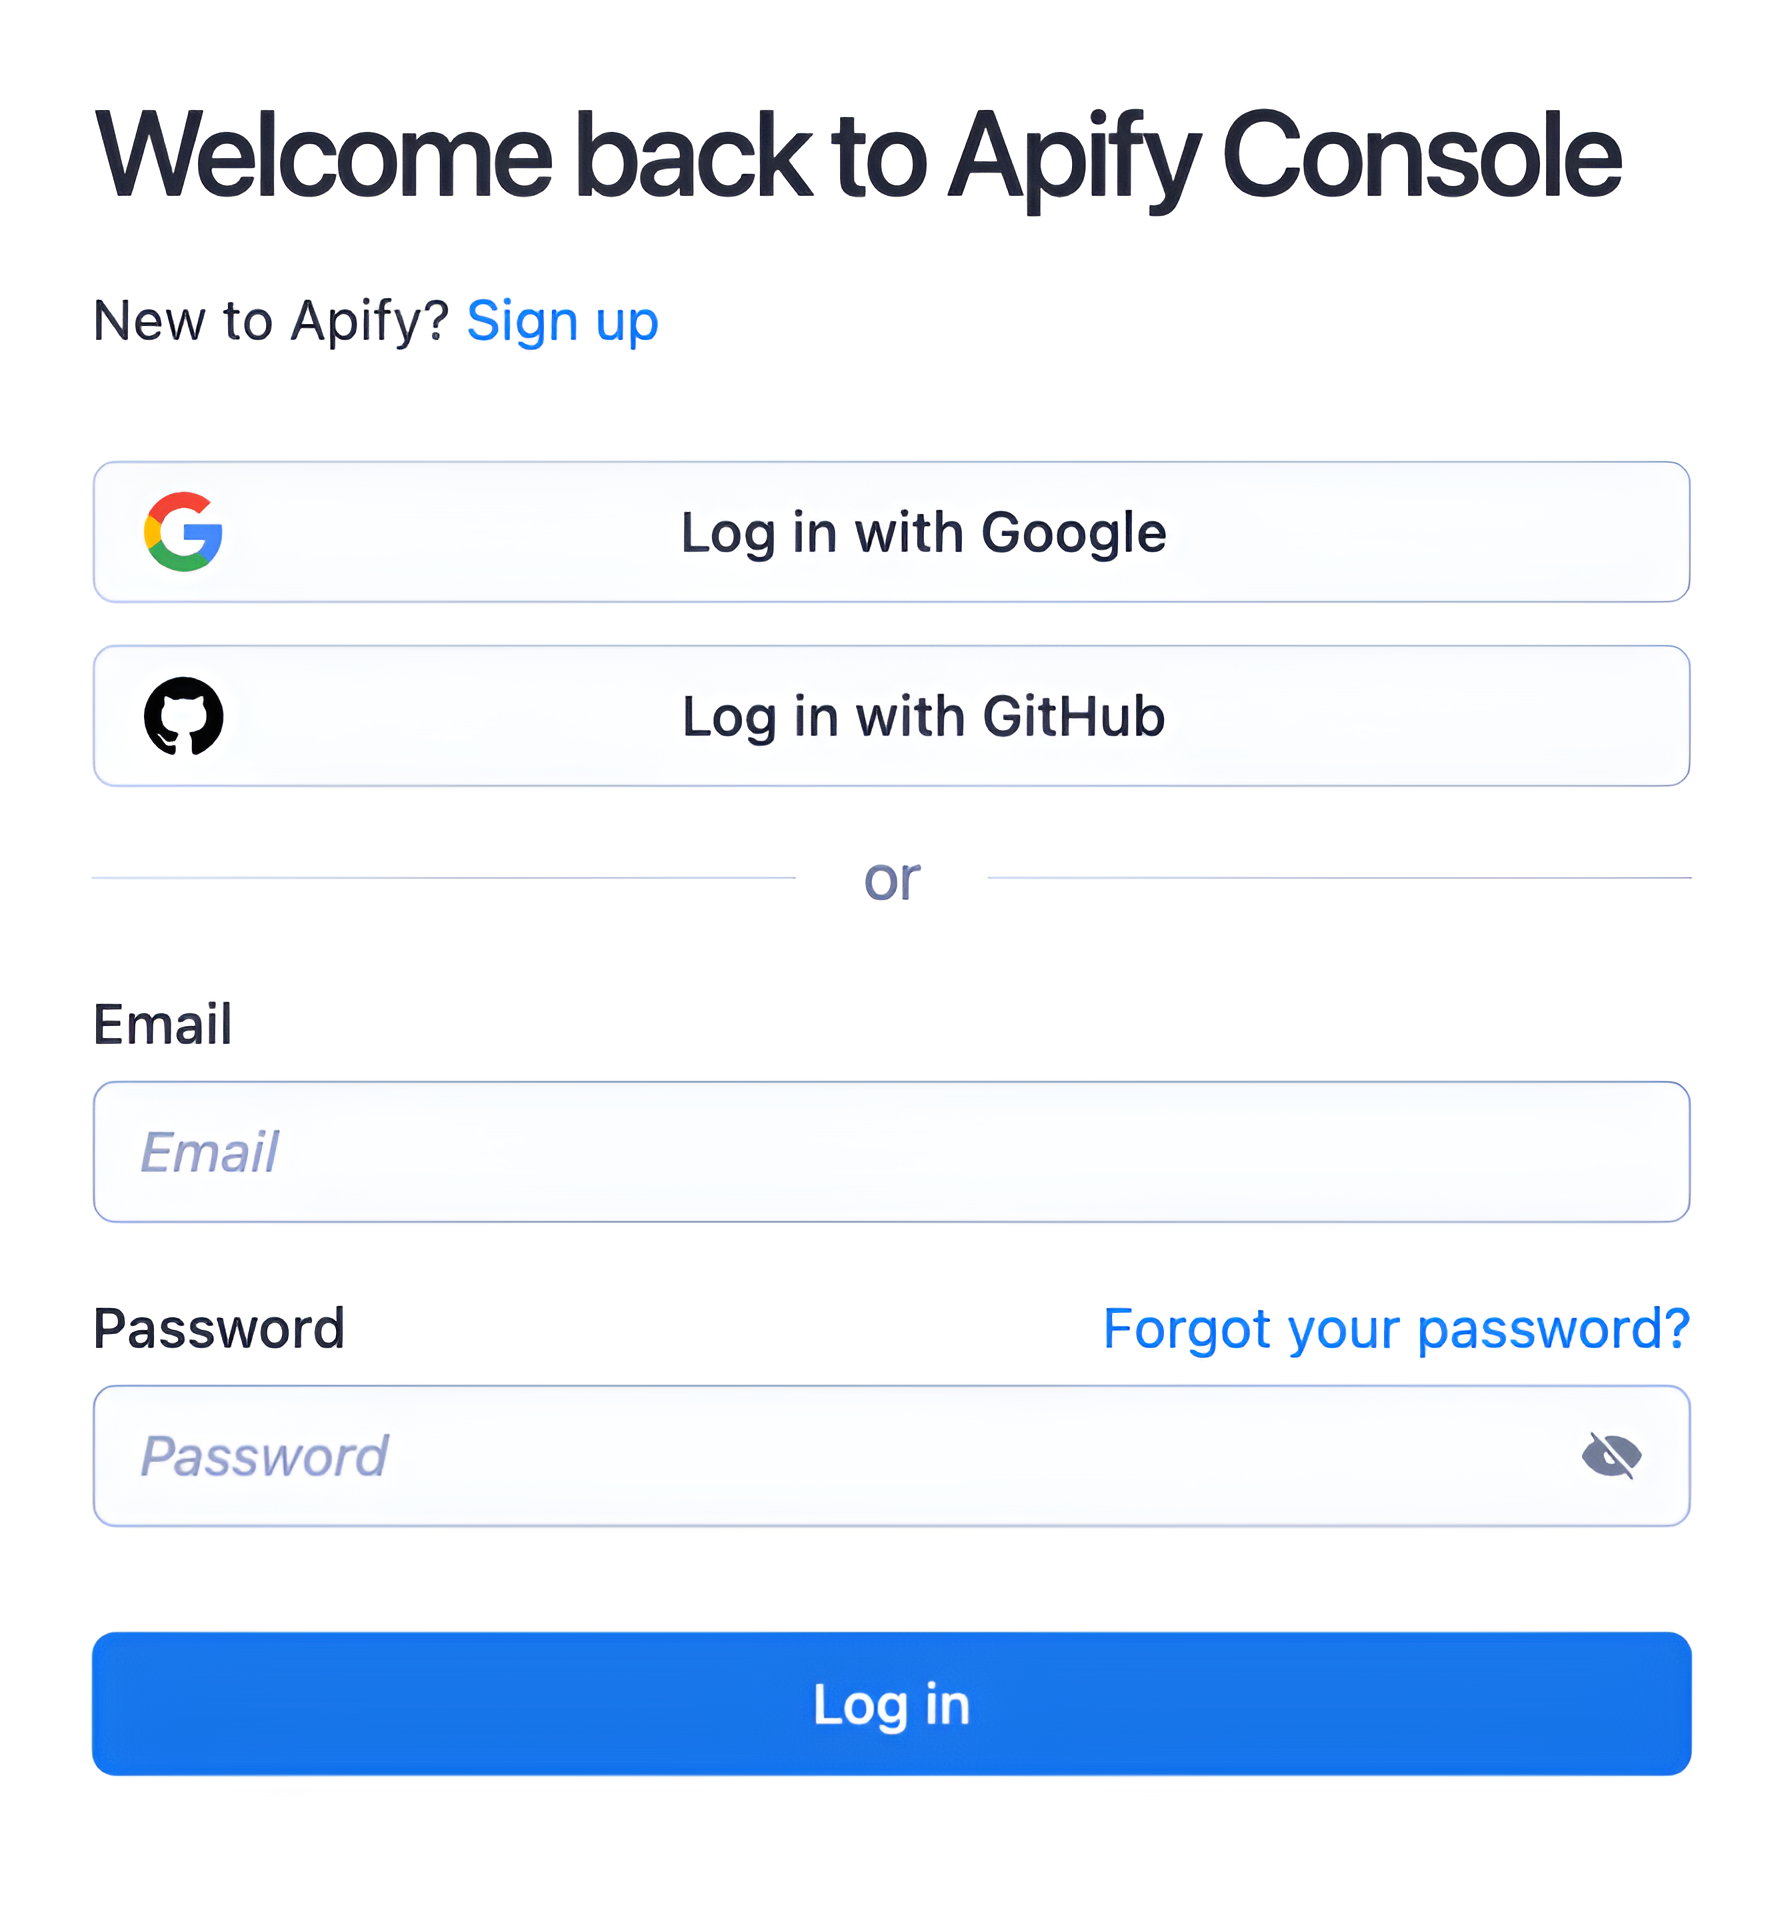 Apify Console sign-in form